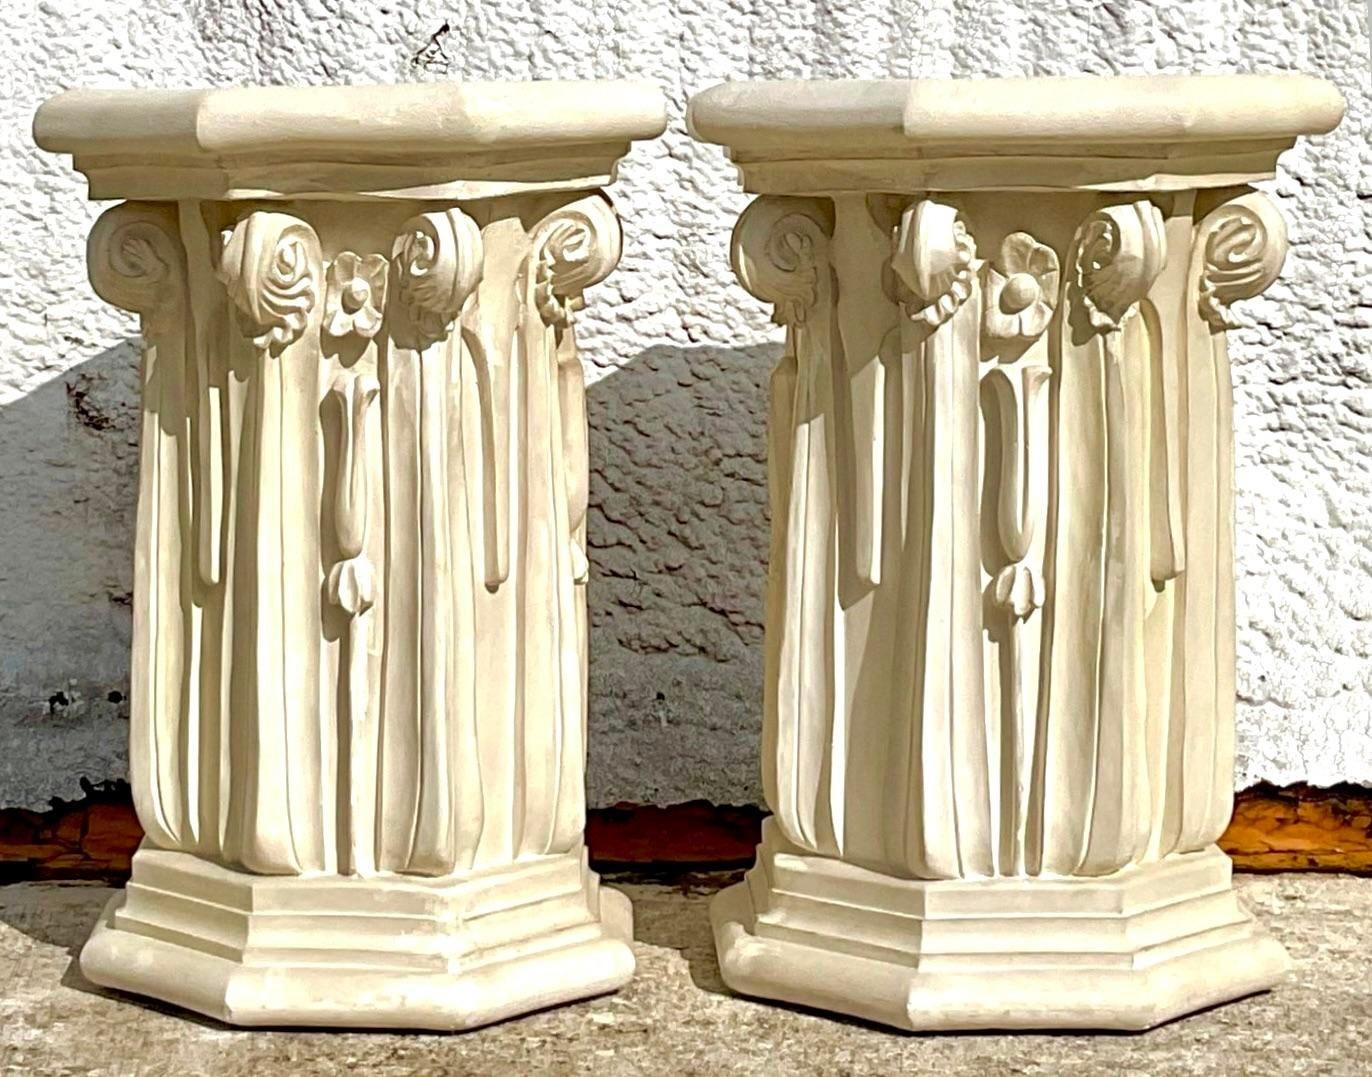 Vintage Neoclassical Ornate Plaster Pedestal In Good Condition For Sale In west palm beach, FL